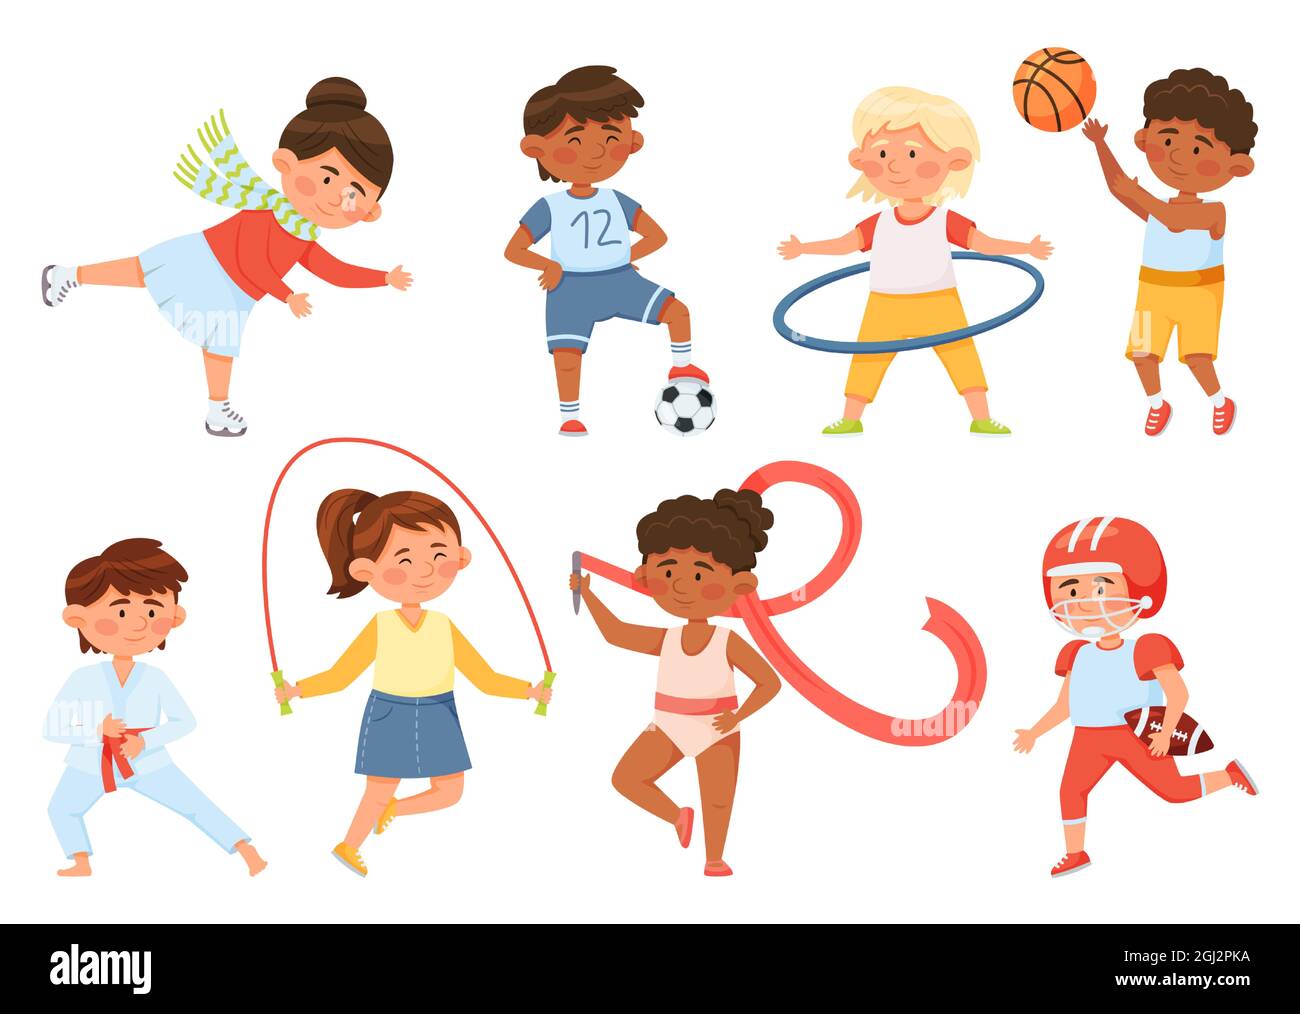 Cartoon children exercising, kids doing sports and gymnastics. Boys and girls playing ball, ice skating, skipping rope, doing karate vector set. Active and healthy lifestyle activities Stock Vector